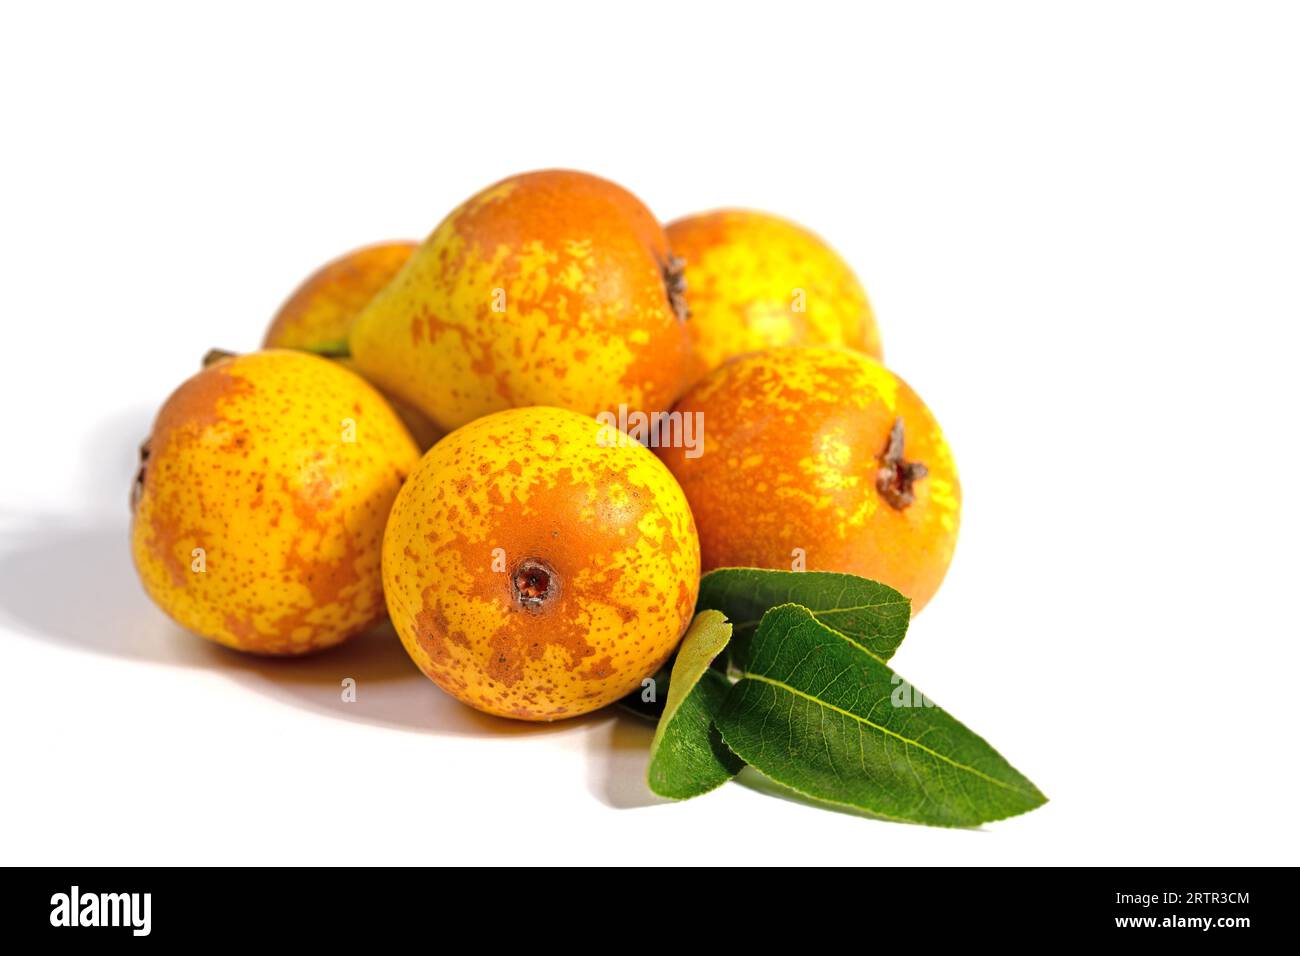 Ripe pears, Pyrus, in front of a white background Stock Photo